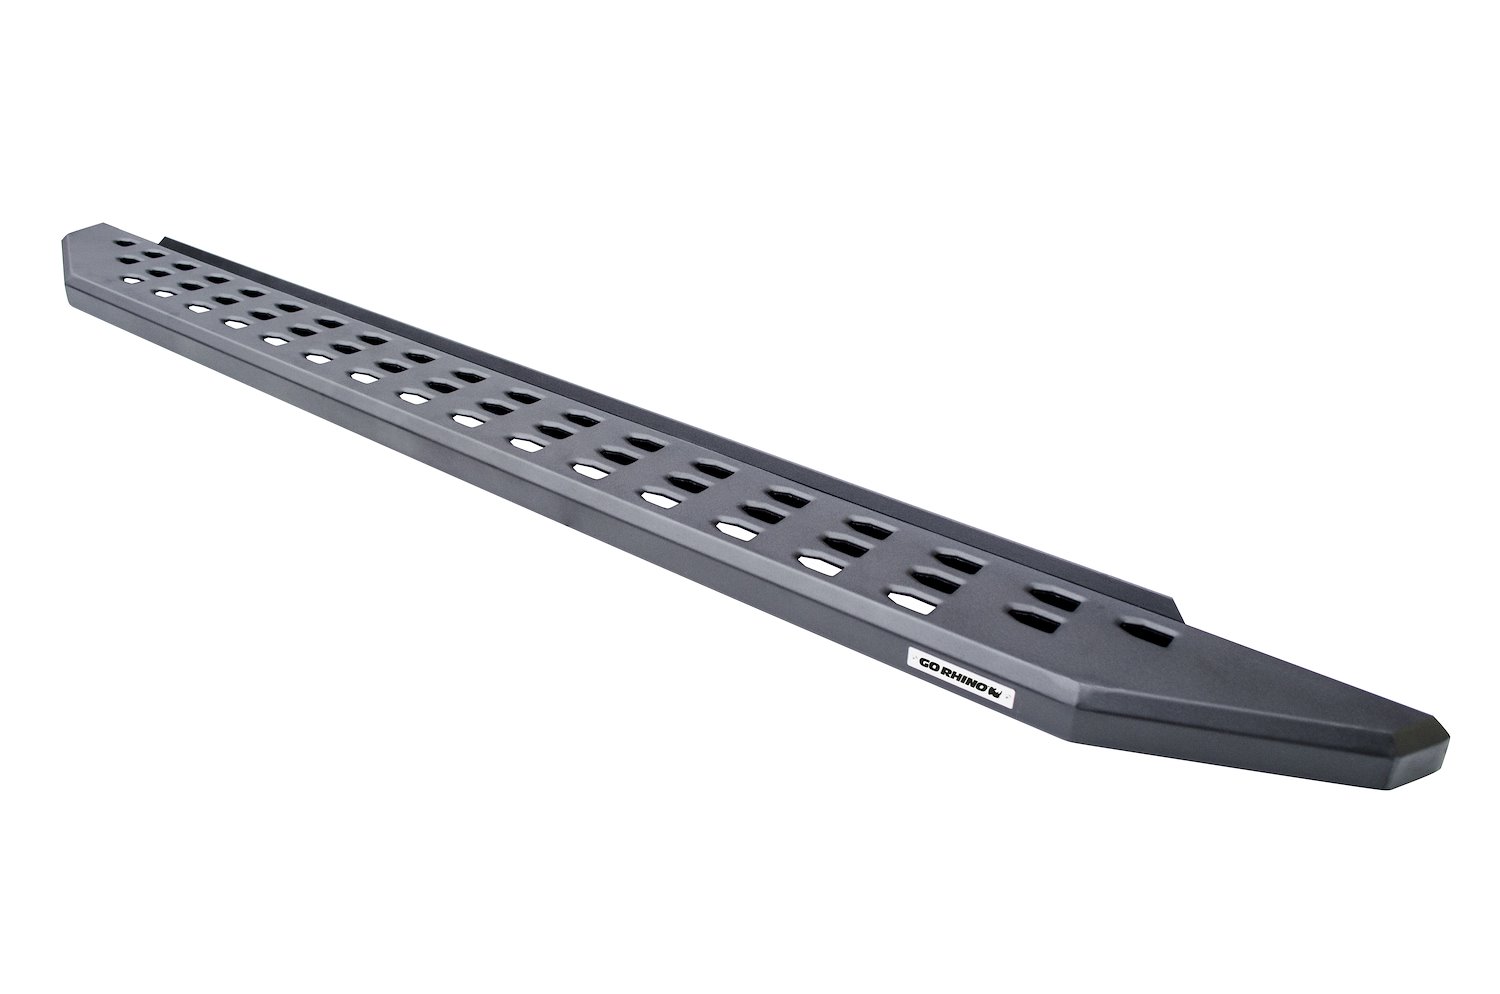 RB20 Running boards for 1999-2016 Ford F250